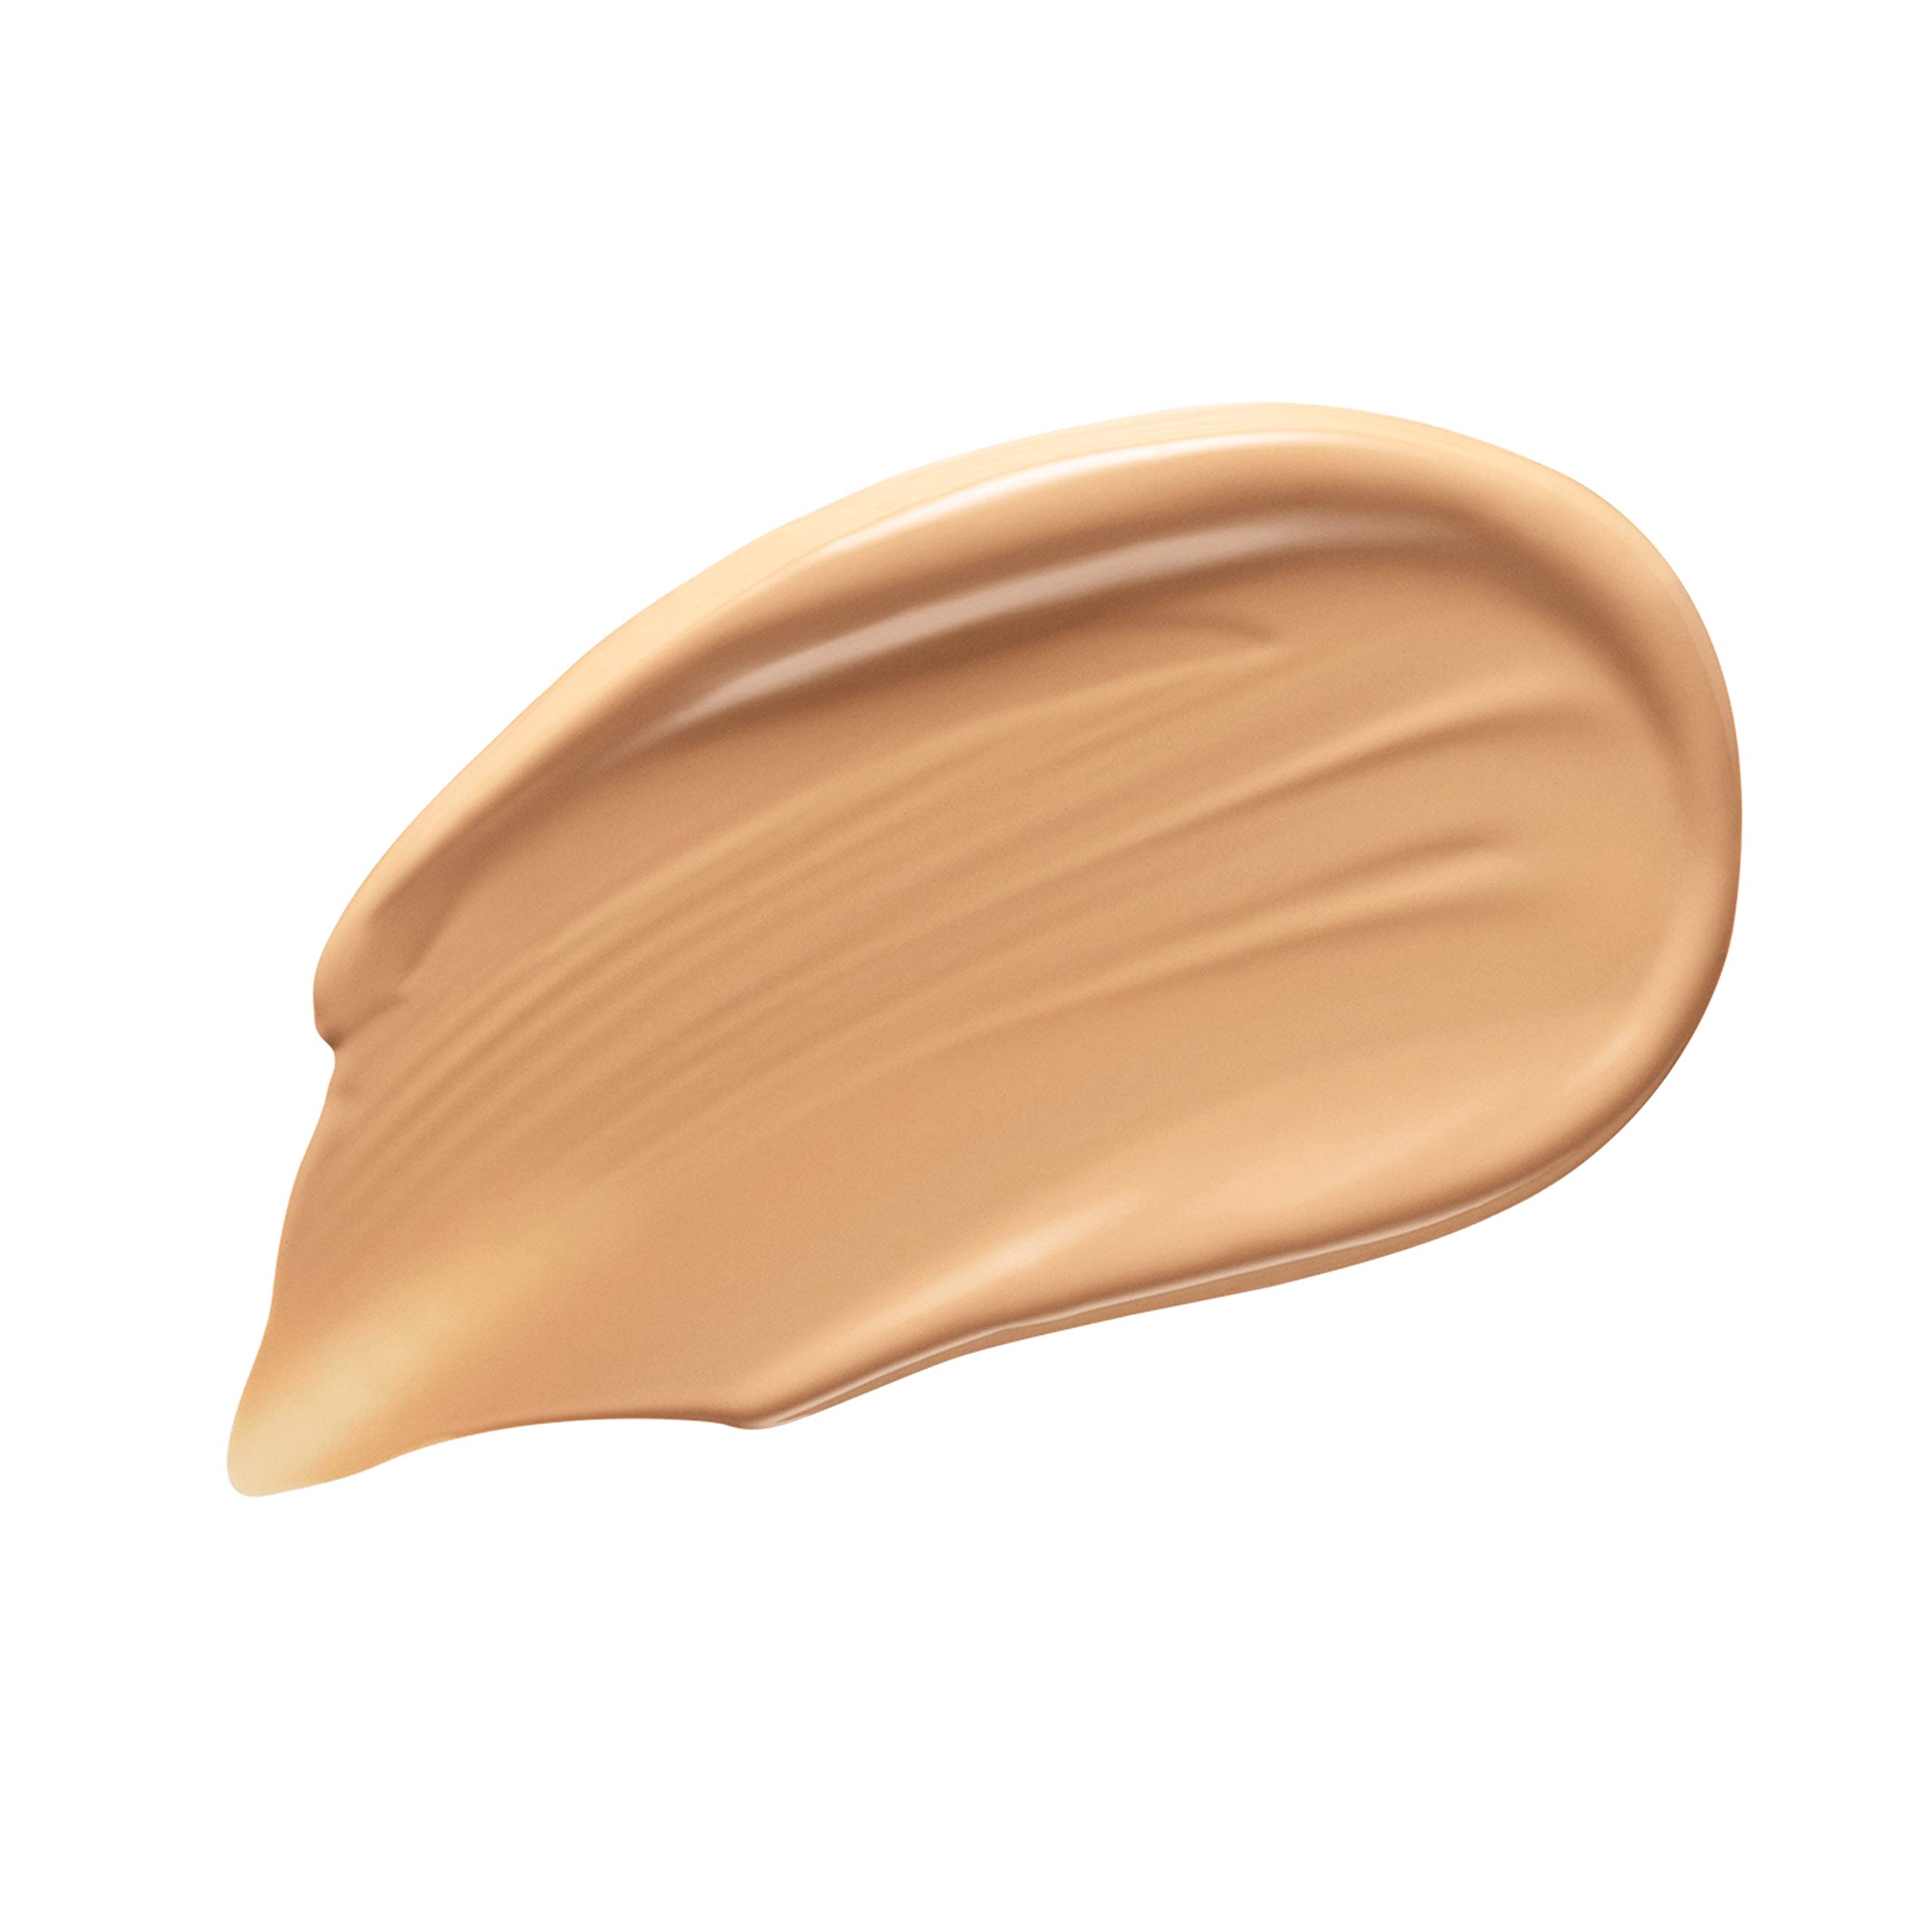 Almay Skin Perfecting Healthy Biome Foundation Makeup with Prebiotic Complex SPF 25, Hypoallergenic, -Fragrance Free, 140 Golden, 1 fl. oz.